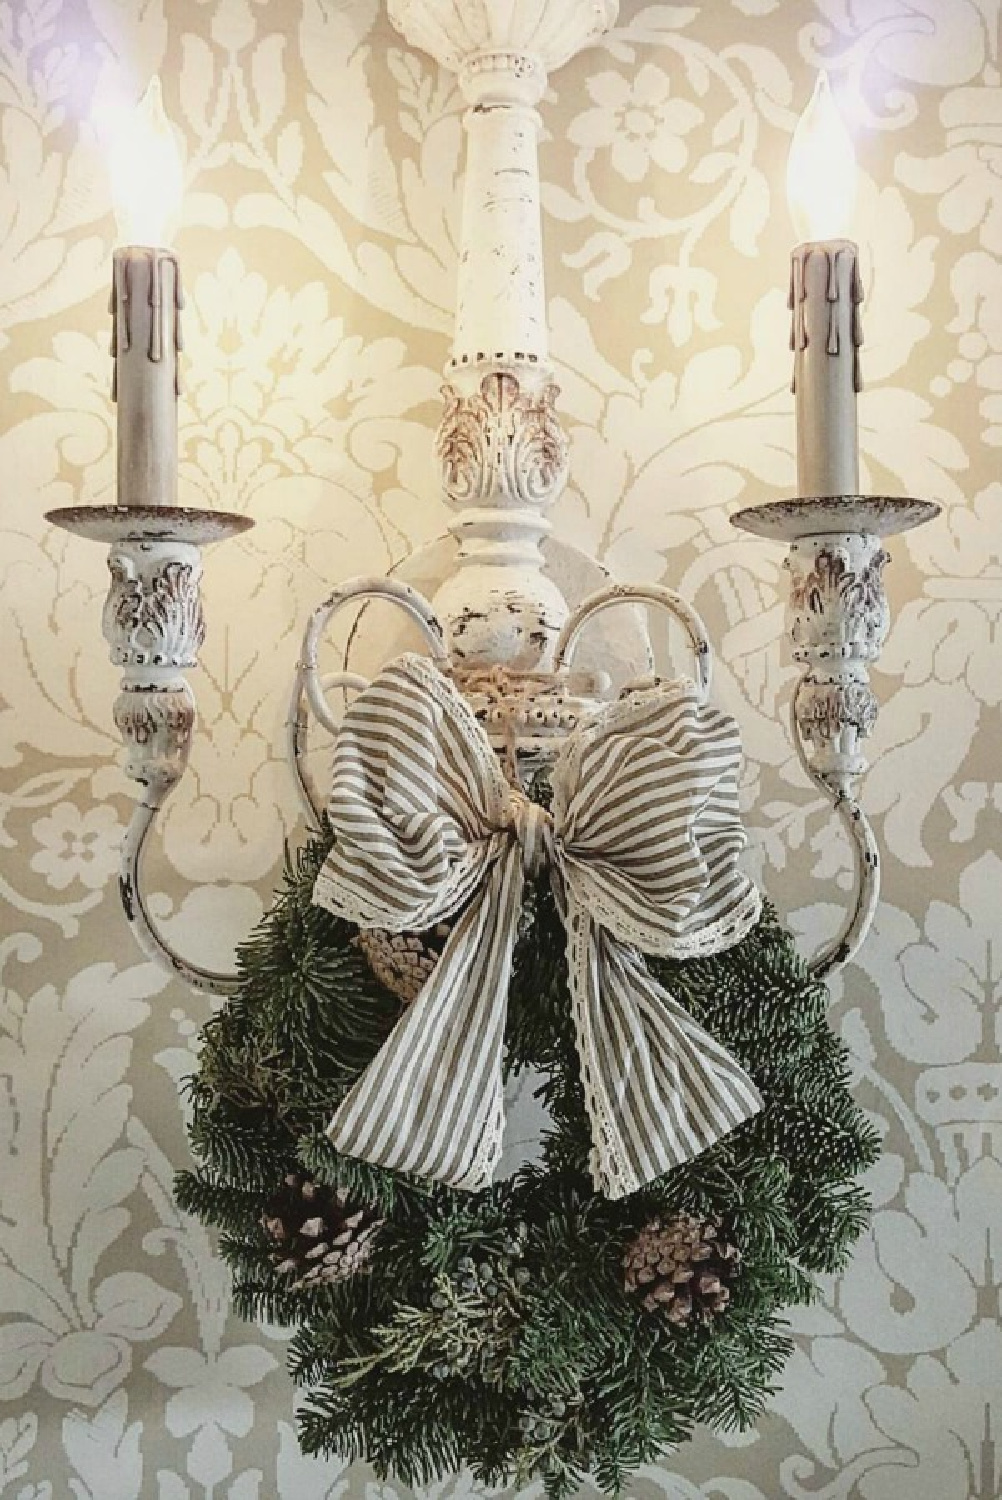 French Christmas decorating ideas from an amazing house tour of country French design from The French Nest Co. #christmasdecor #frenchcountry #frenchfarmhouse #frenchchristmas #whitedecor